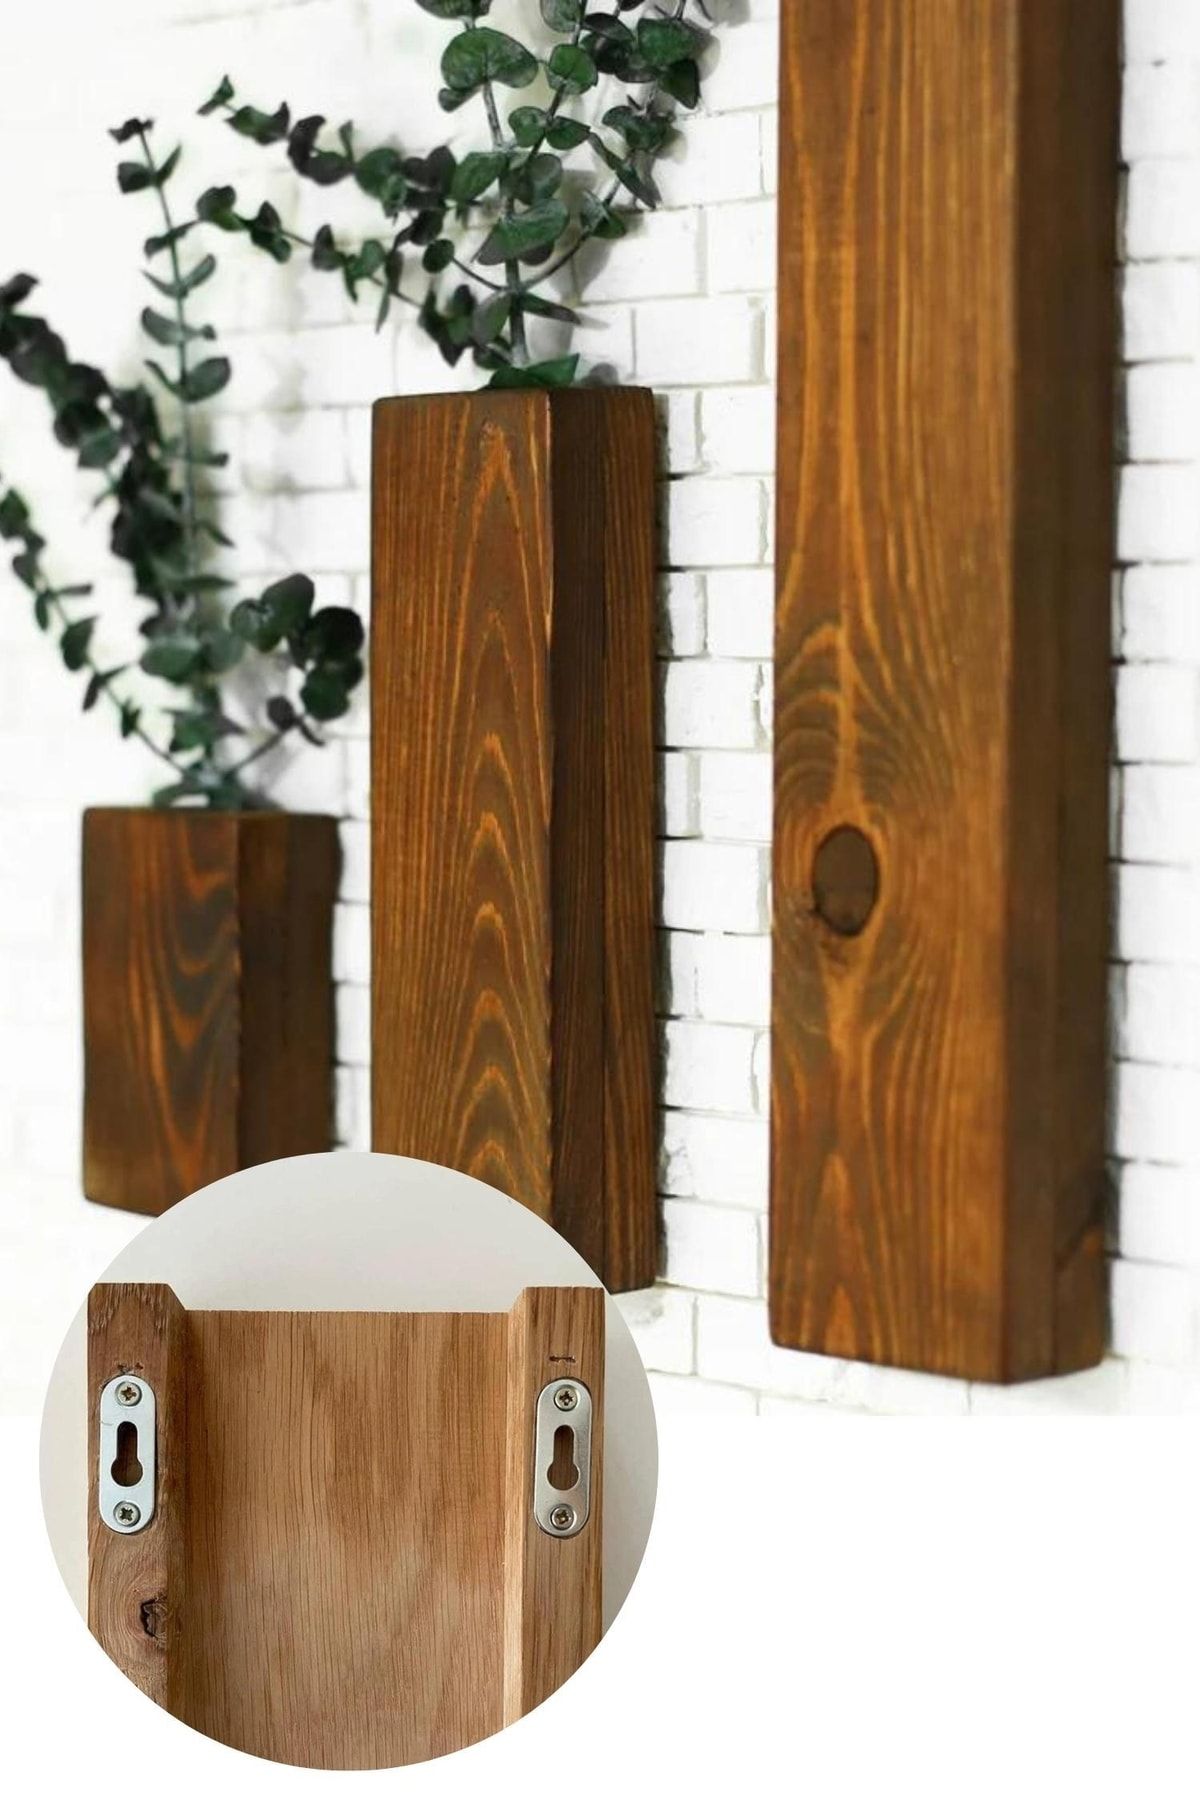 Buy Wooden Photo Clips For Photo Decoration On Wall